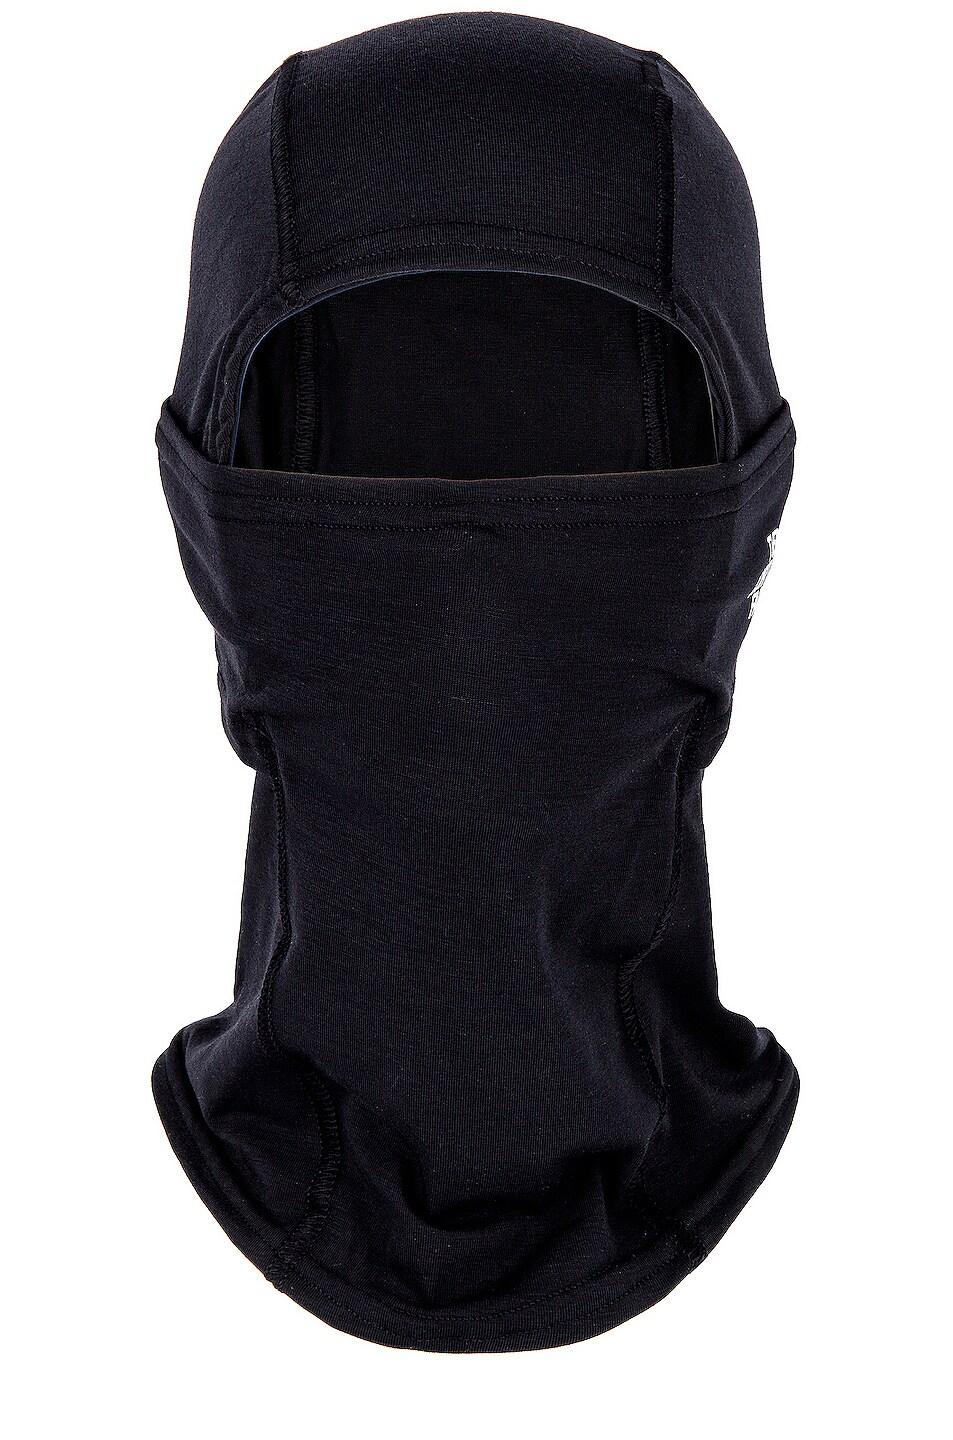 The North Face Synthetic Tekware Balaclava in Black for Men - Lyst